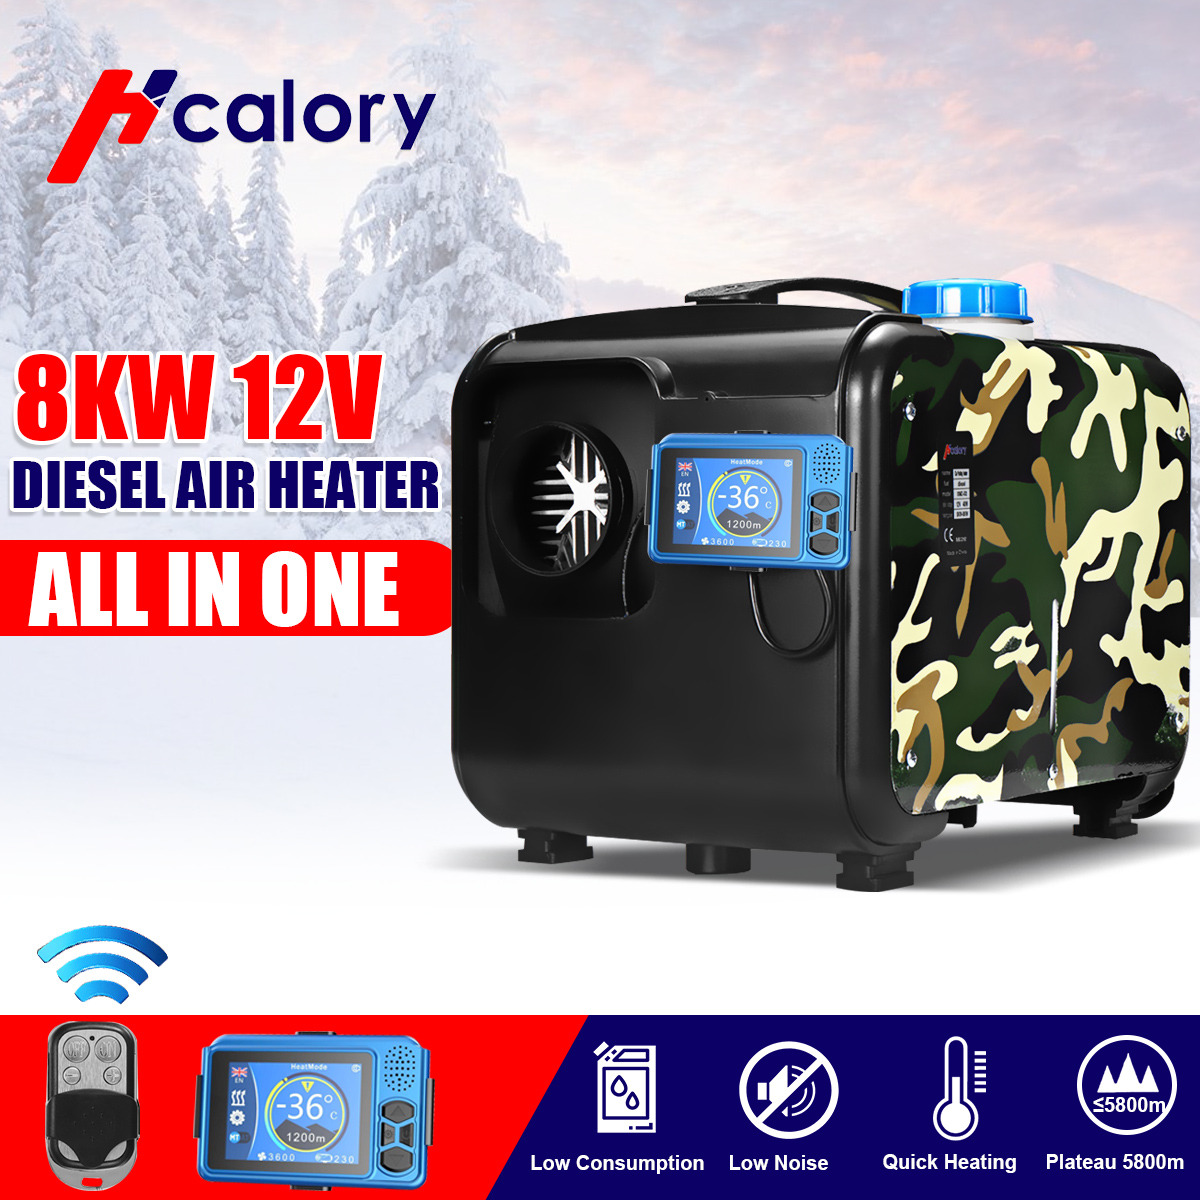 All in One Unit Car Heating 2KW 8KW 12V Diesel Air Heater Single Hole LCD  Monitor Parking Warmer For Car Truck Bus Boat RV - Price history & Review